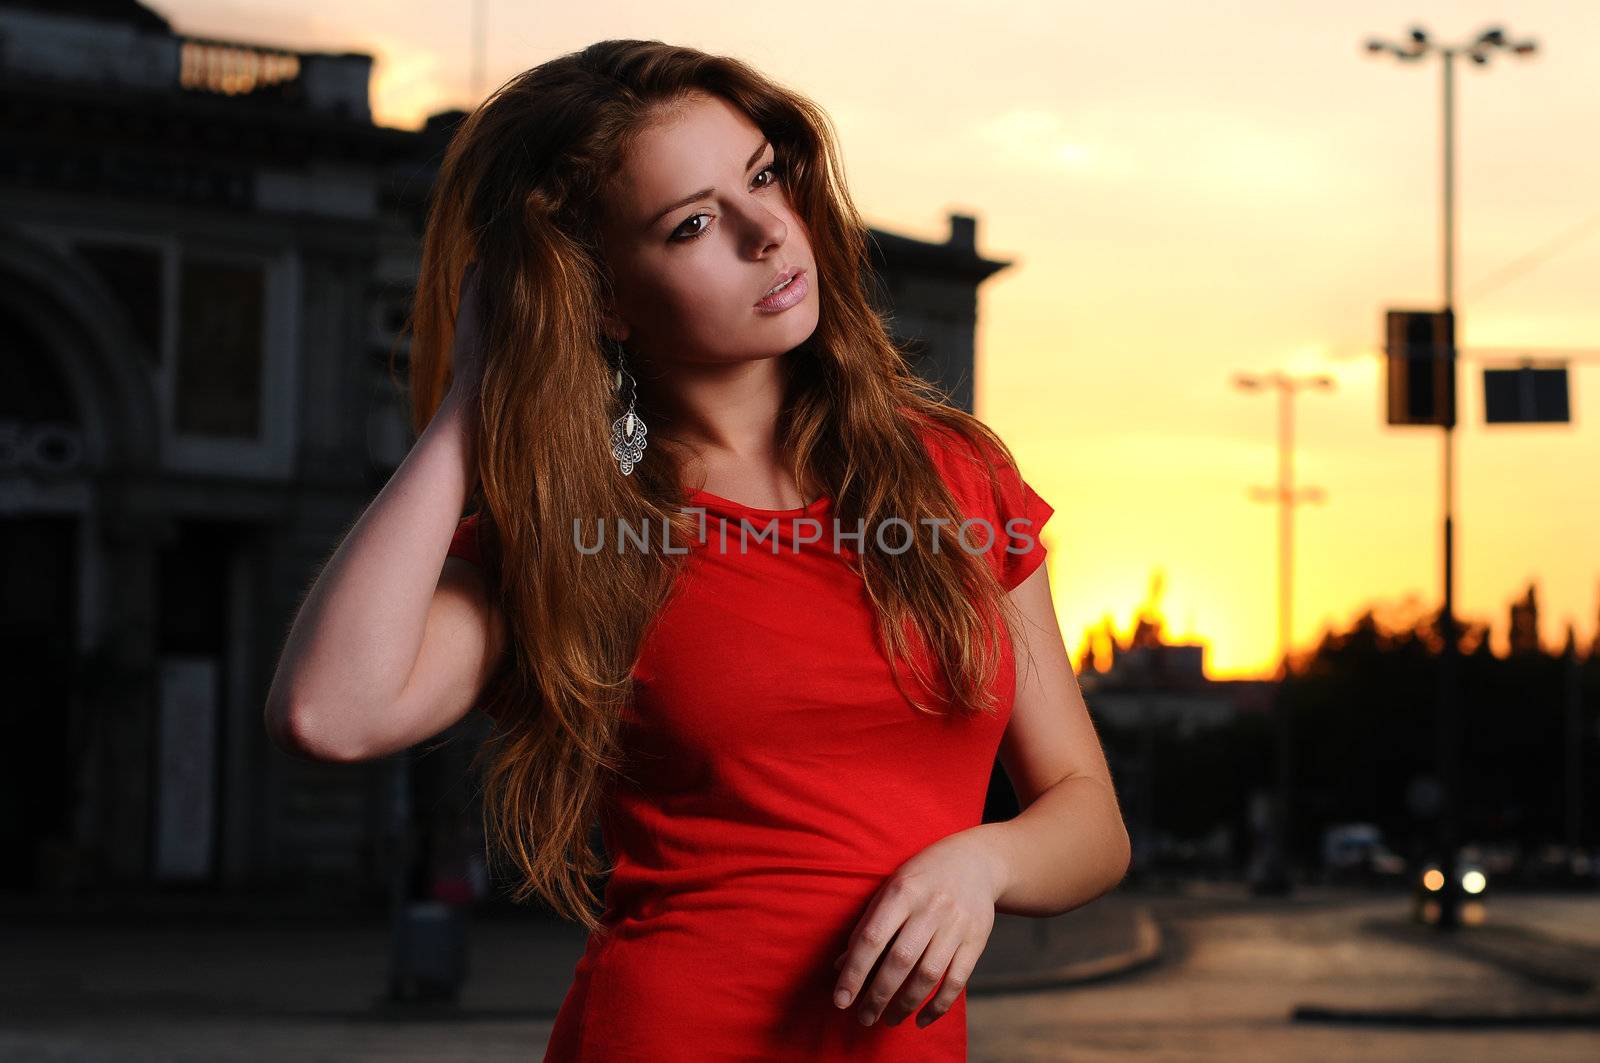 Portrait of a young attractive woman in a red dress in the city at dusk by gravityimaging1